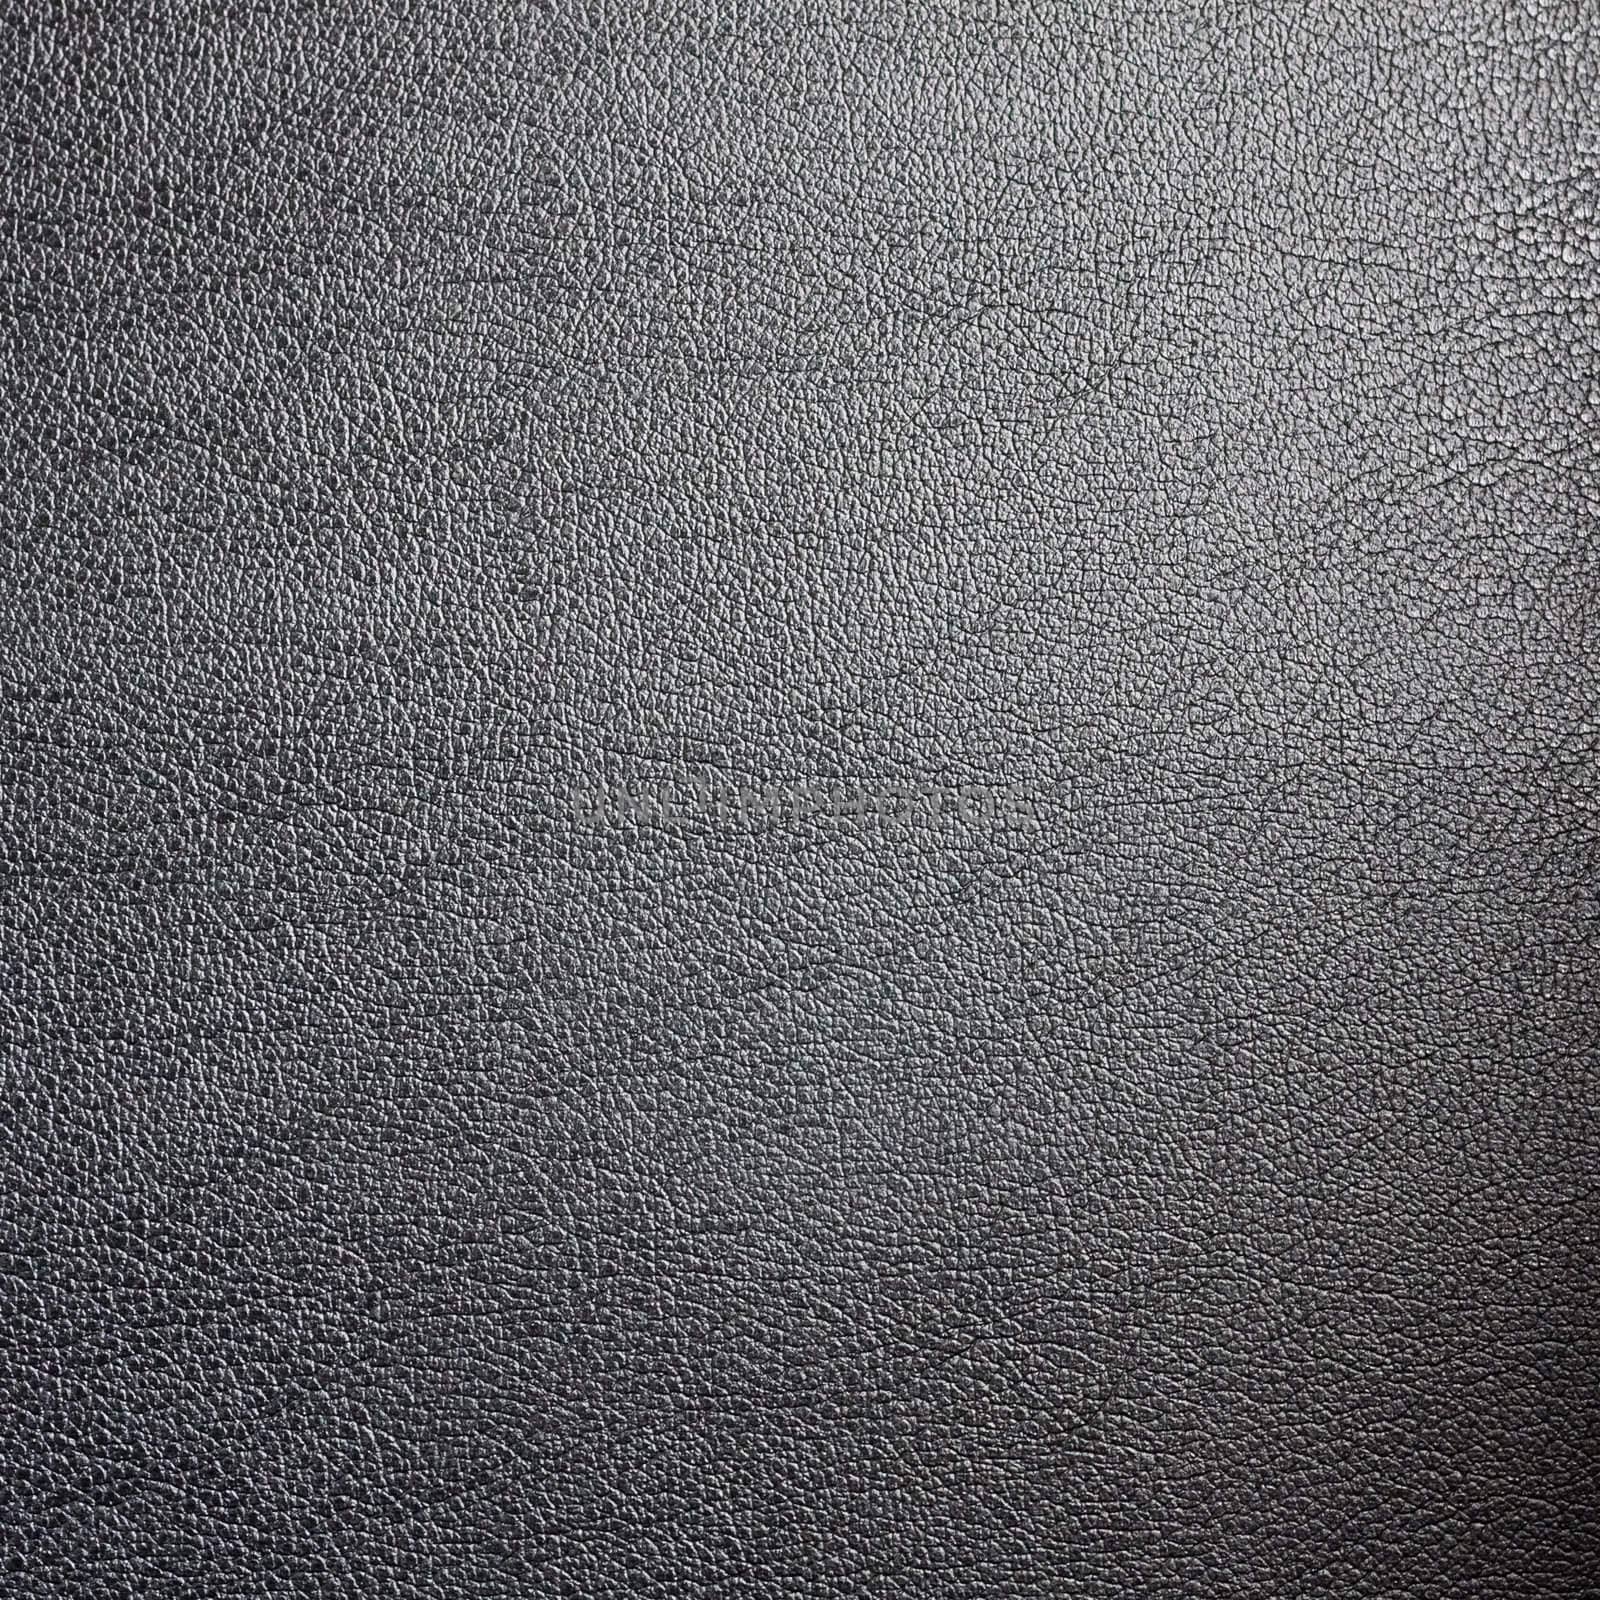 Leather texture made from deer skin by ryhor